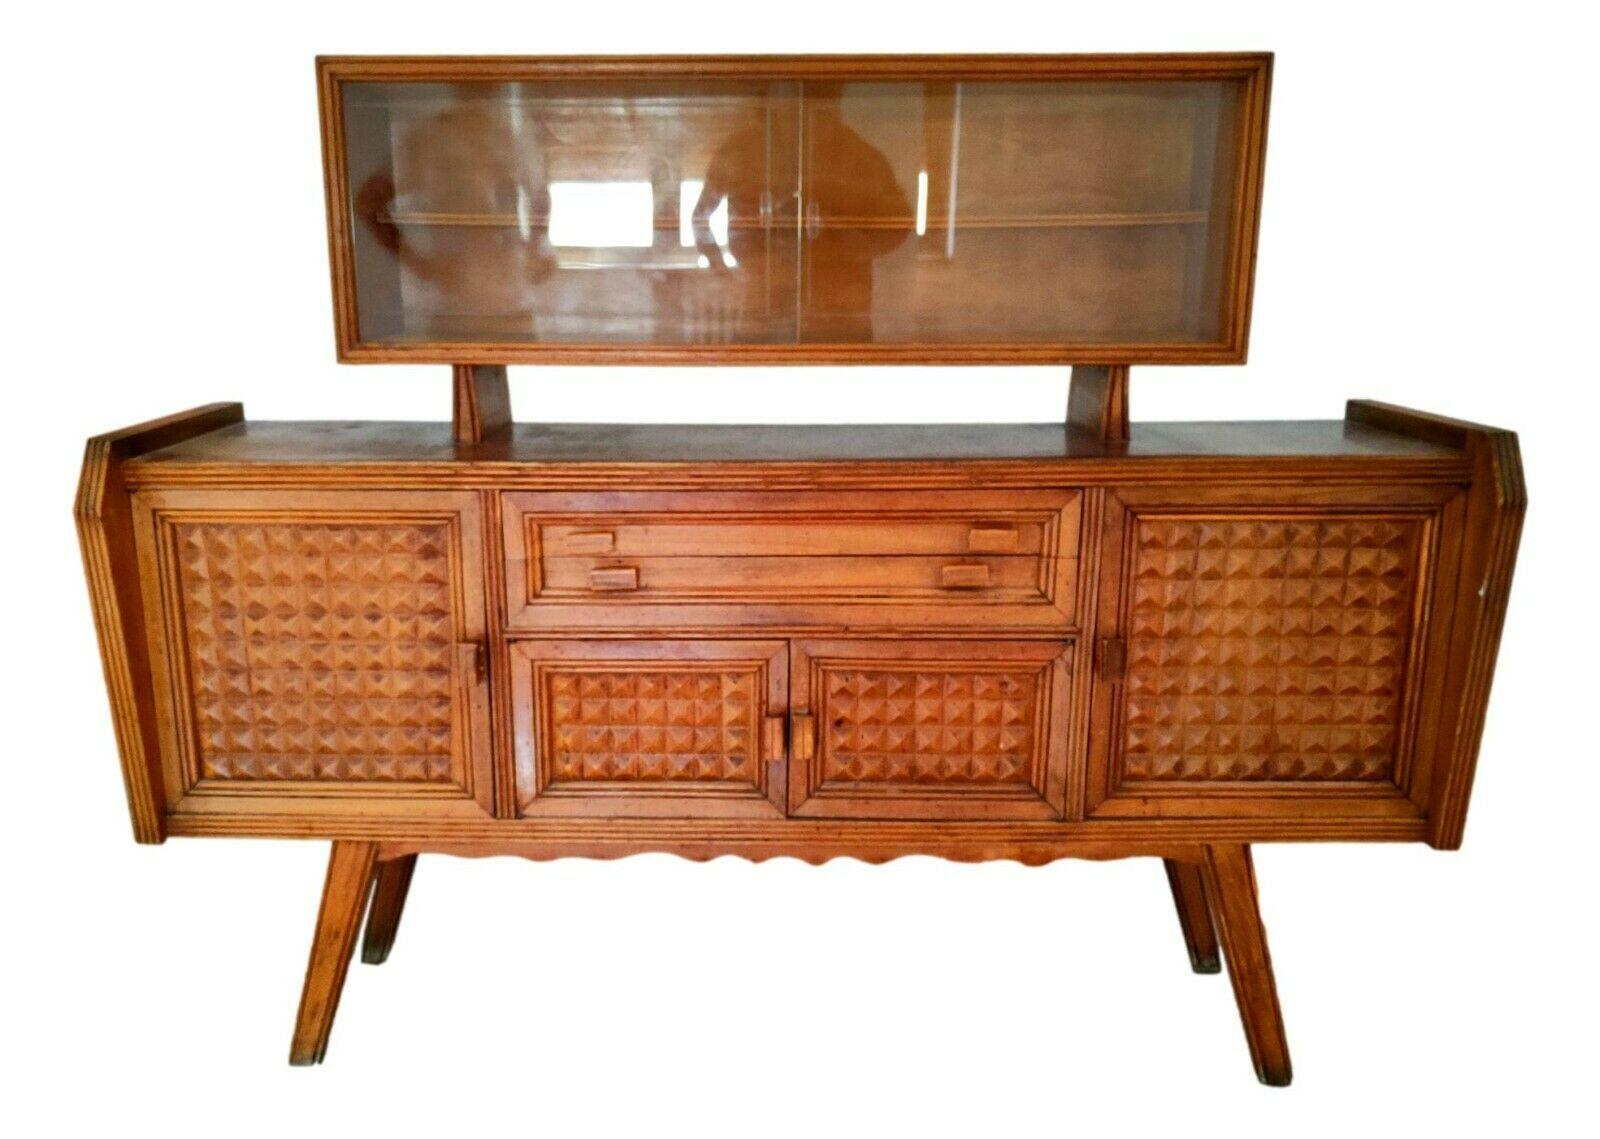 Splendid original sideboard from the 60s, design by paolo buffa, with resealable top riser

it measures approximately 180 cm in length, 48 cm in width, 90 cm in height (part of the cabinet) - 140 cm in height including riser

four opening